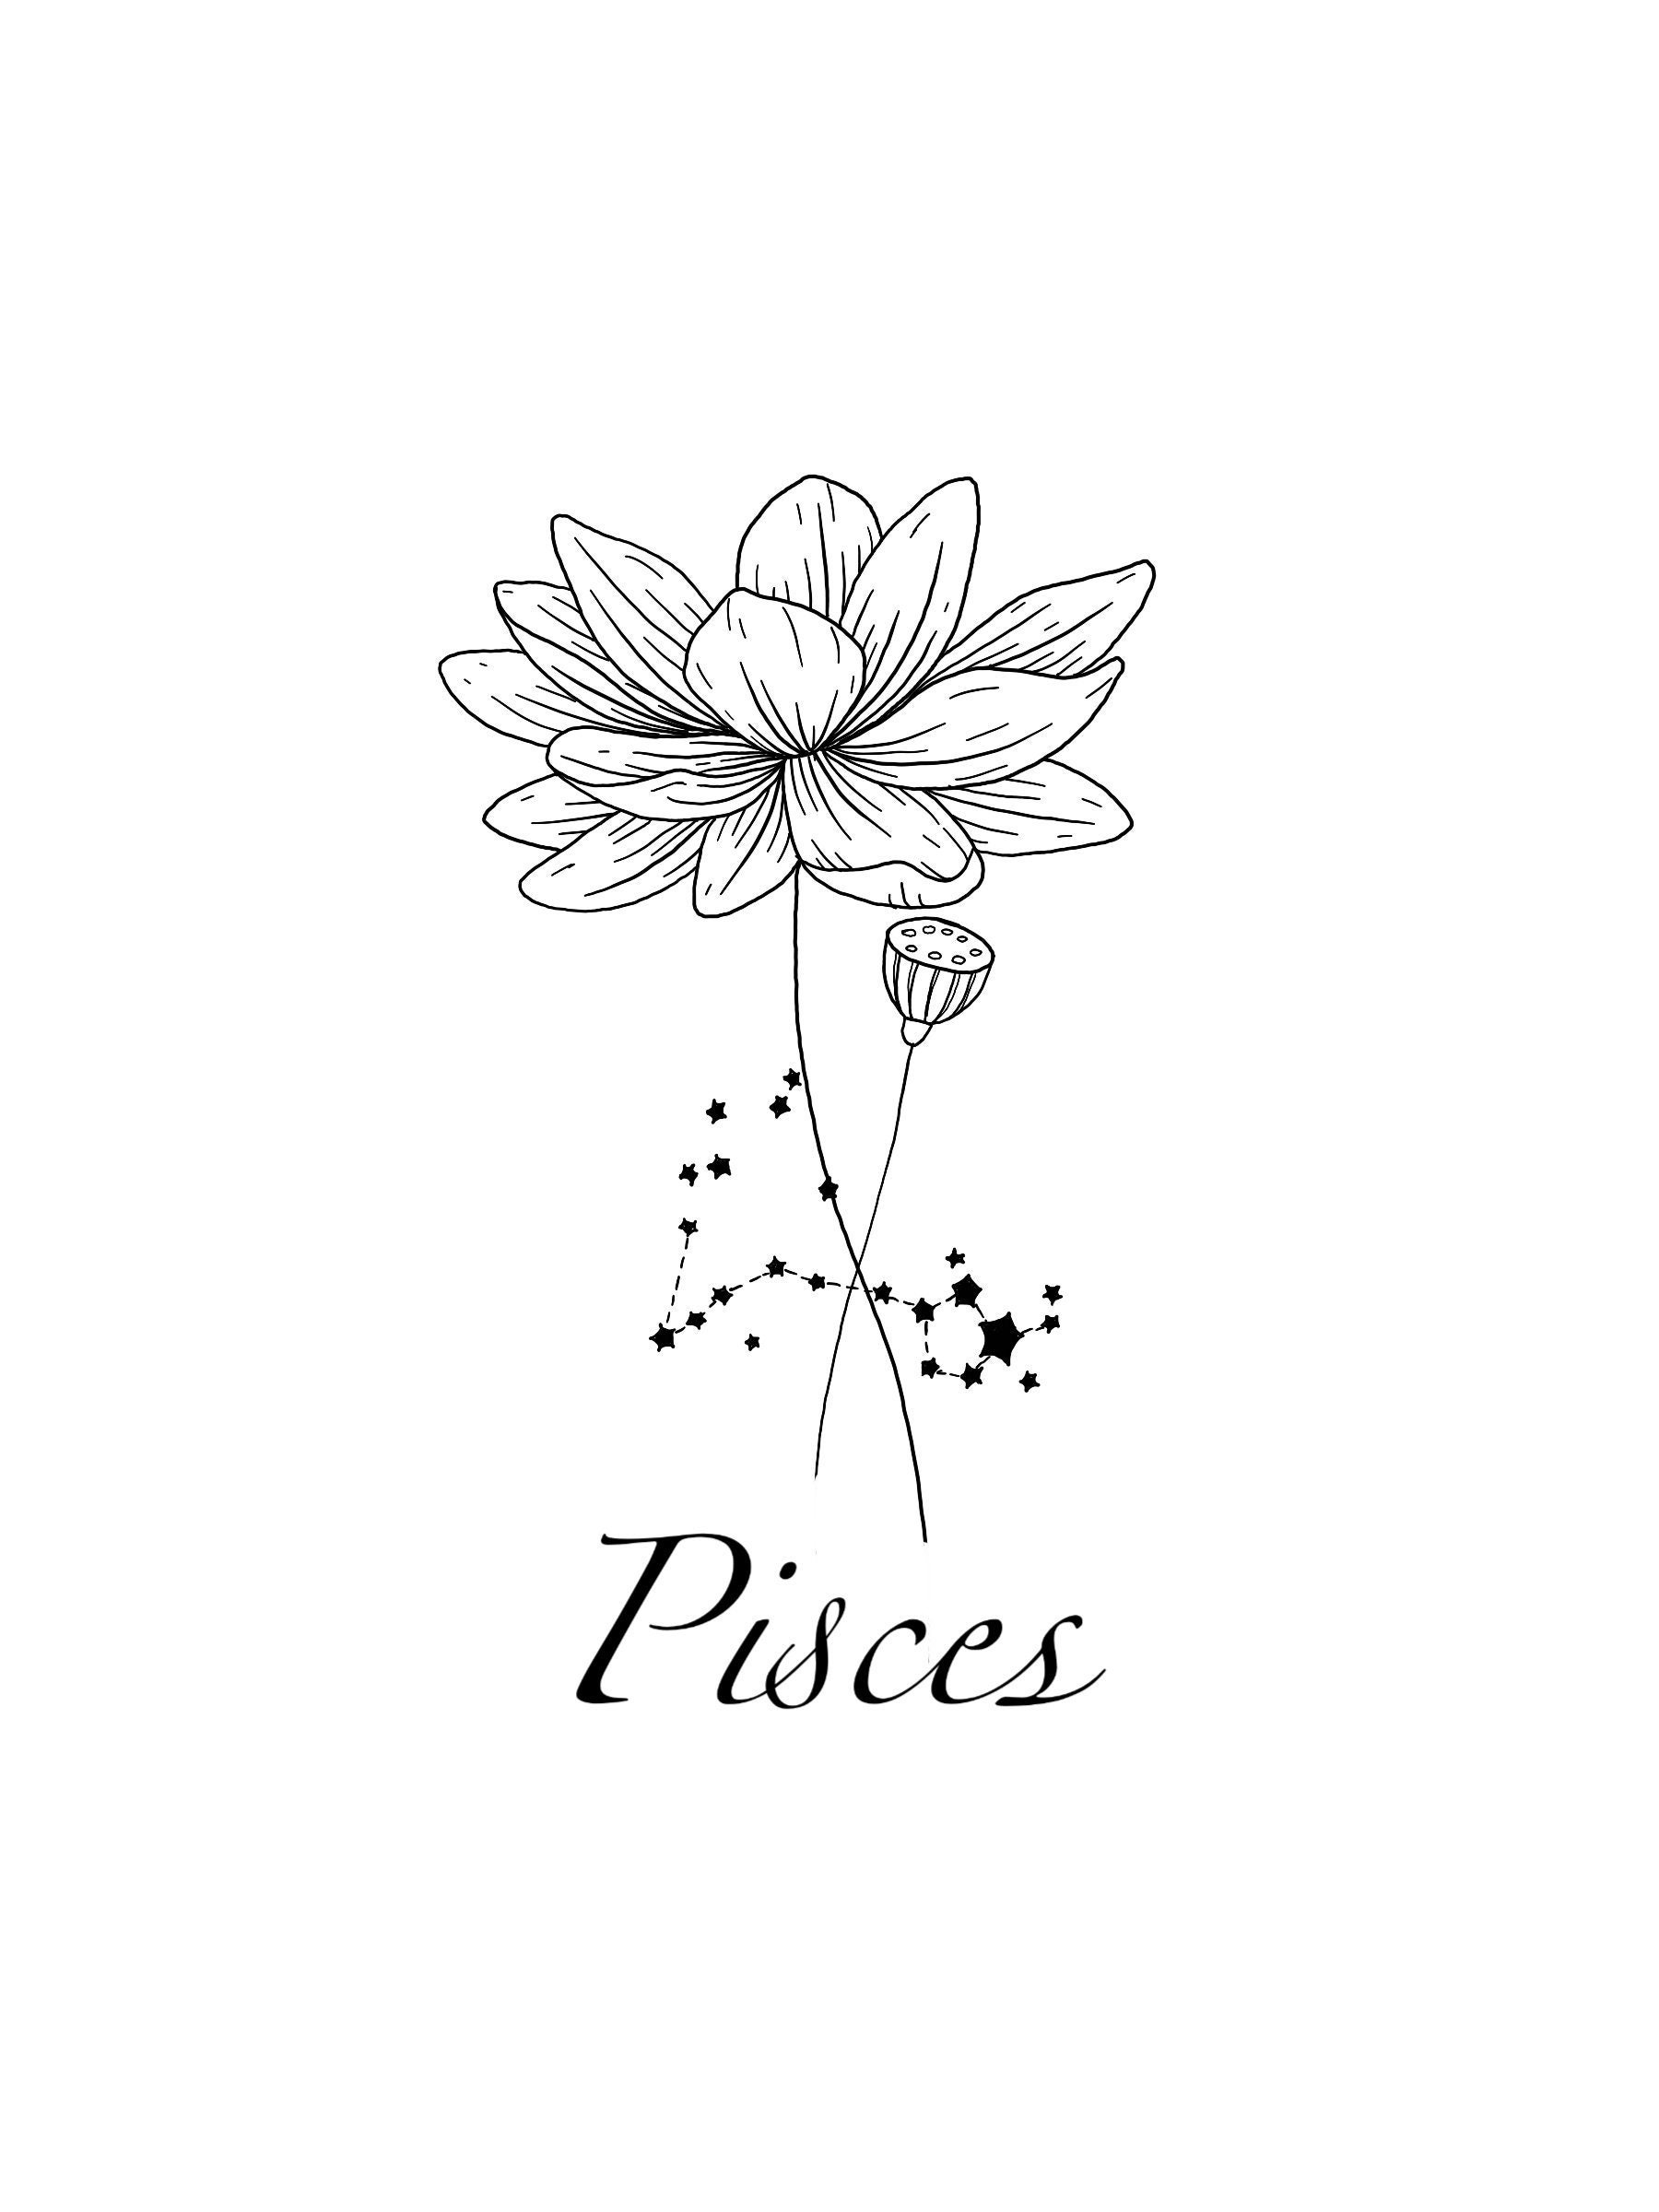 80 Pisces Tattoo Ideas and Designs 